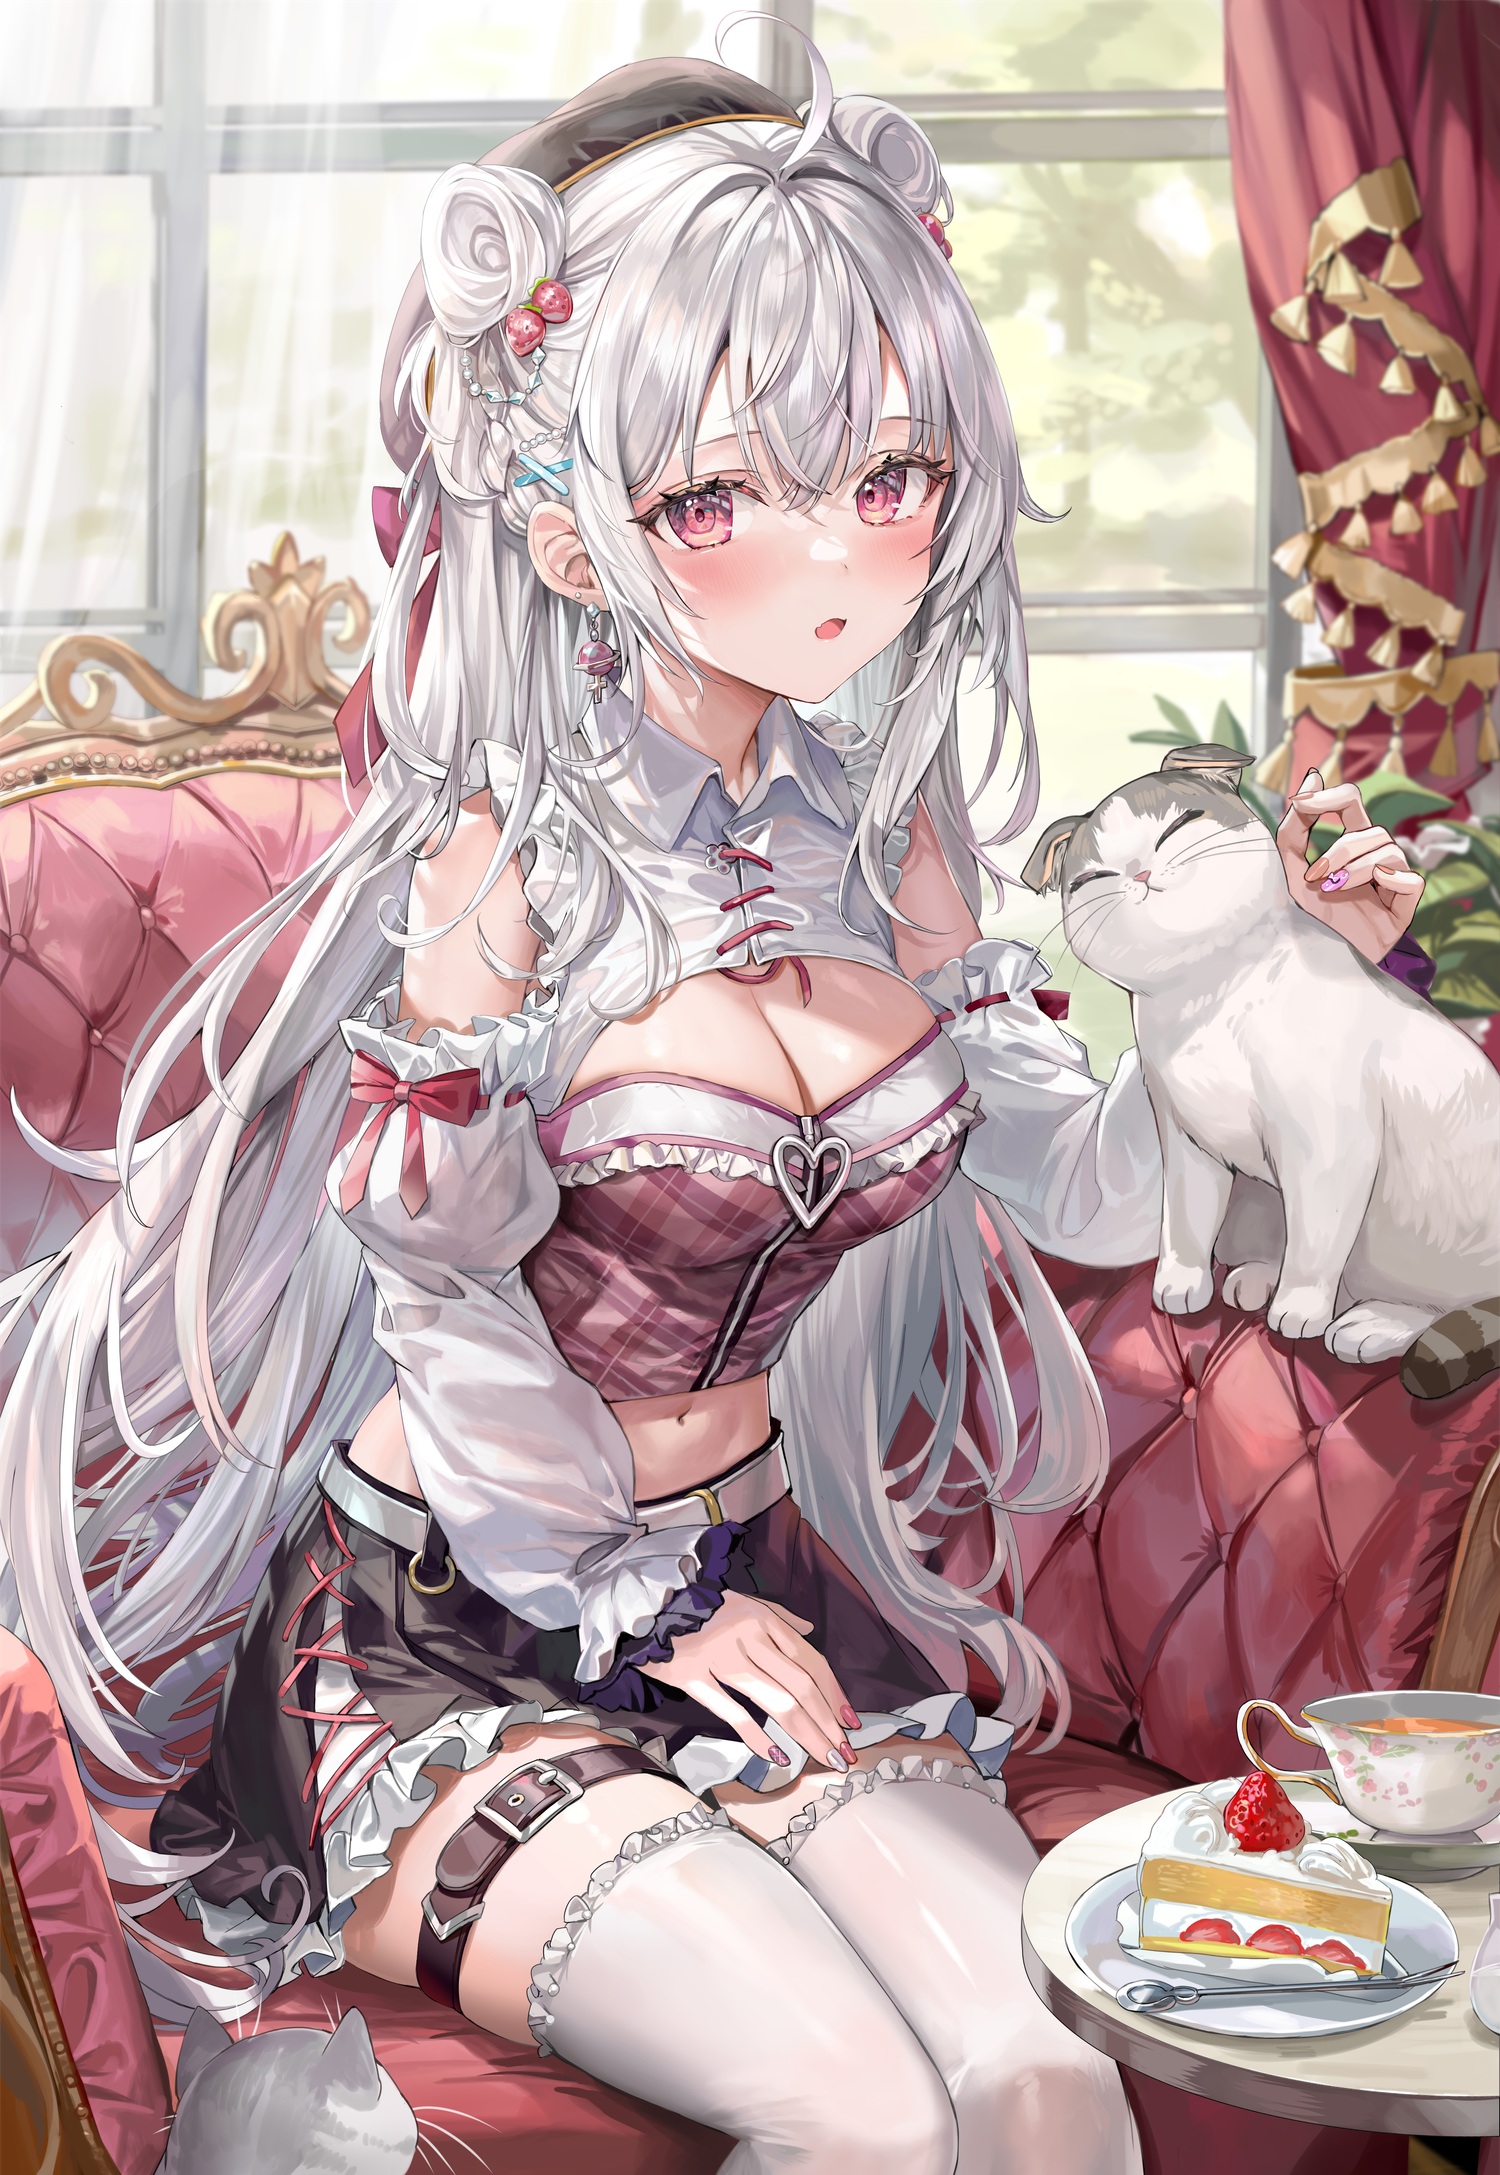 Anime 1500x2175 anime anime girls portrait display stockings cats couch blushing long hair cake sweets silver hair cleavage purple eyes tea drink Pixiv